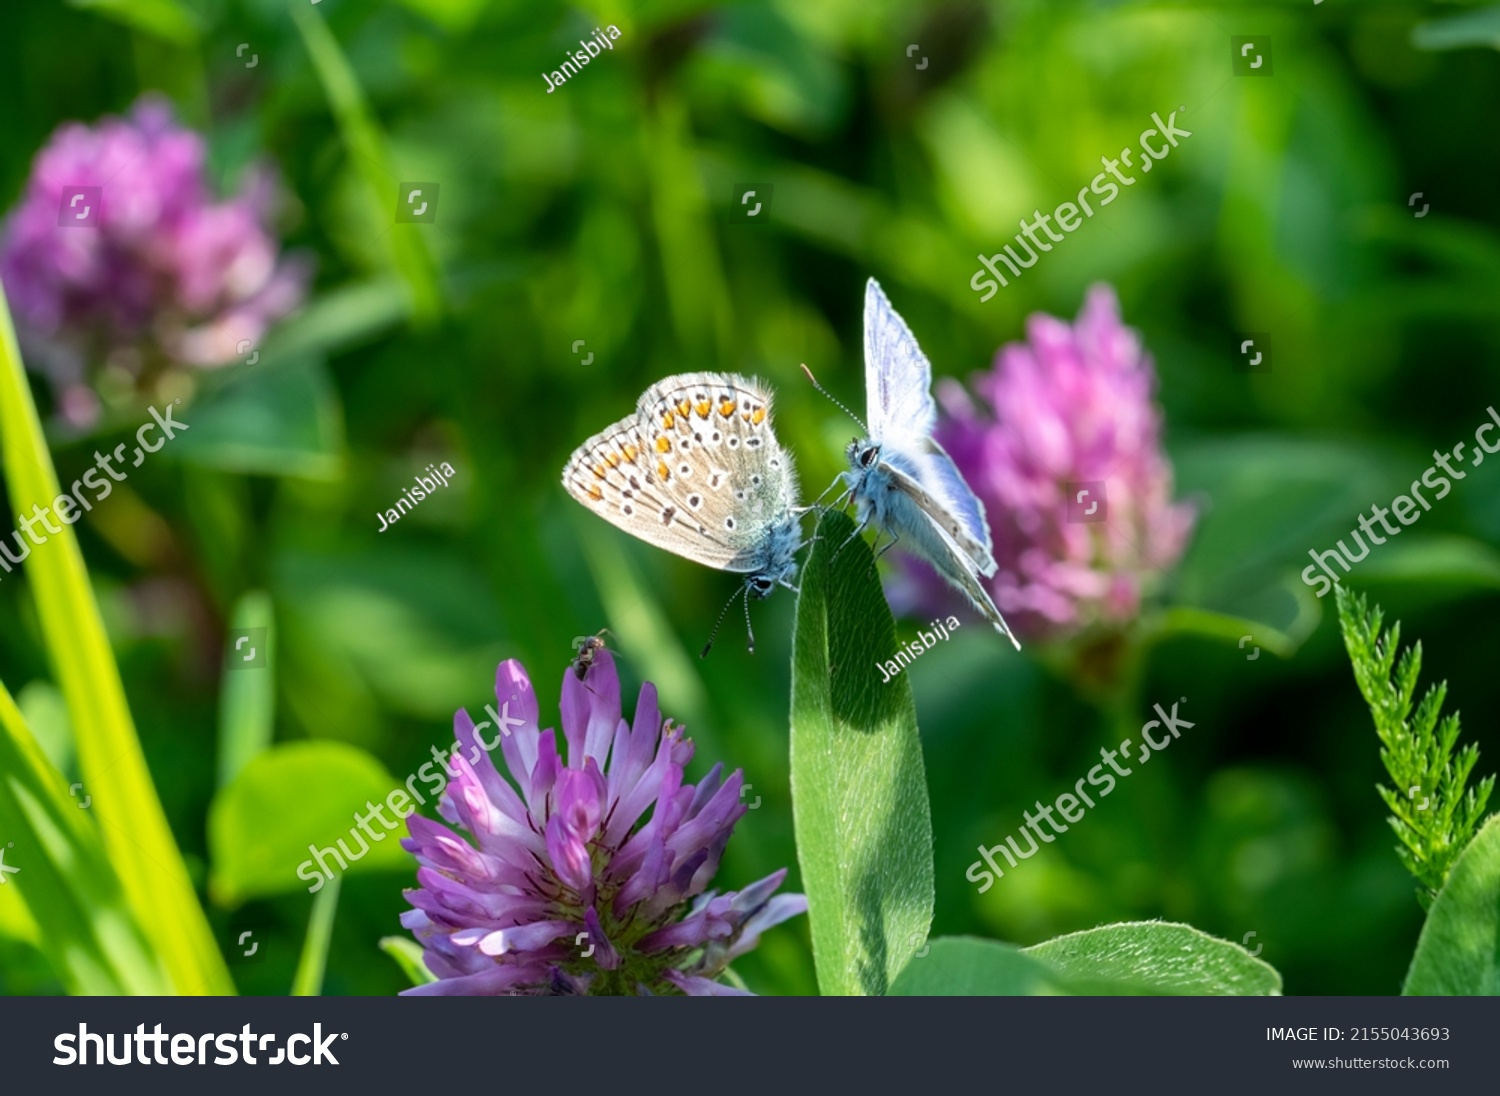 Two common blue butterflies (Polyommatus icarus) on a red clover flower. A small insect on a wild flower, common in Europe. Natural meadows. #2155043693